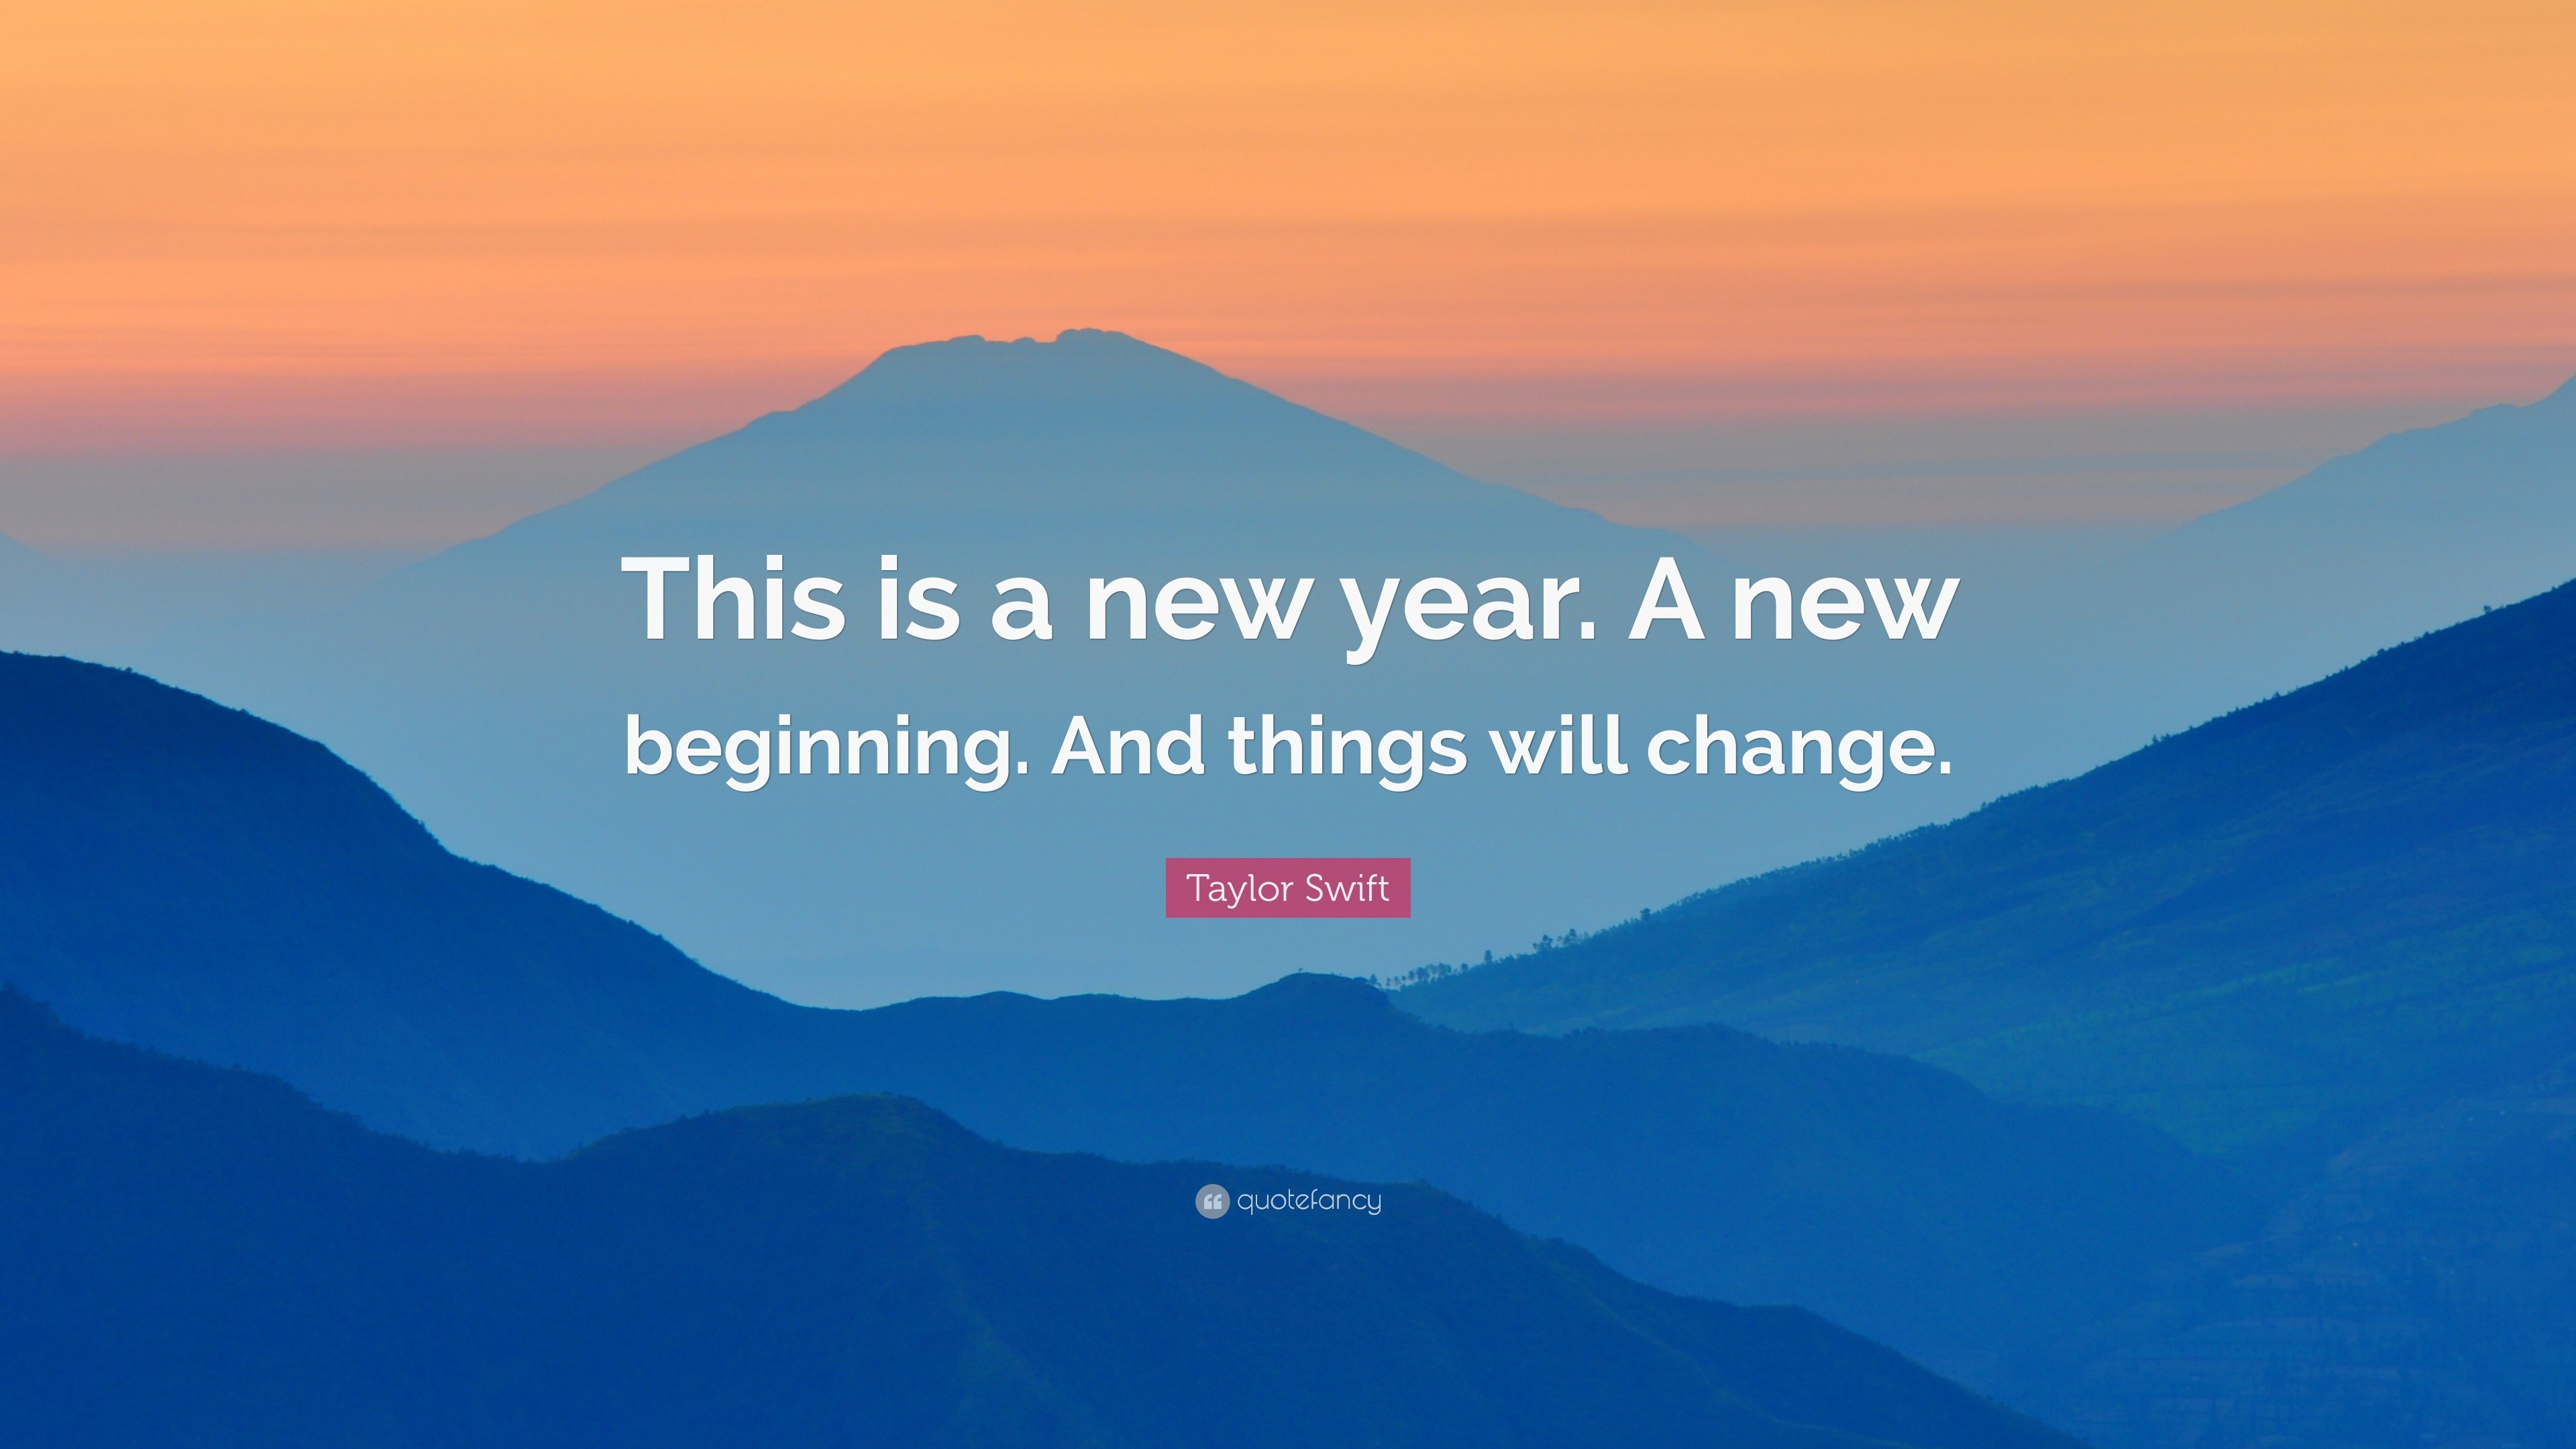 20 quotes for new year's and new beginnings Keren